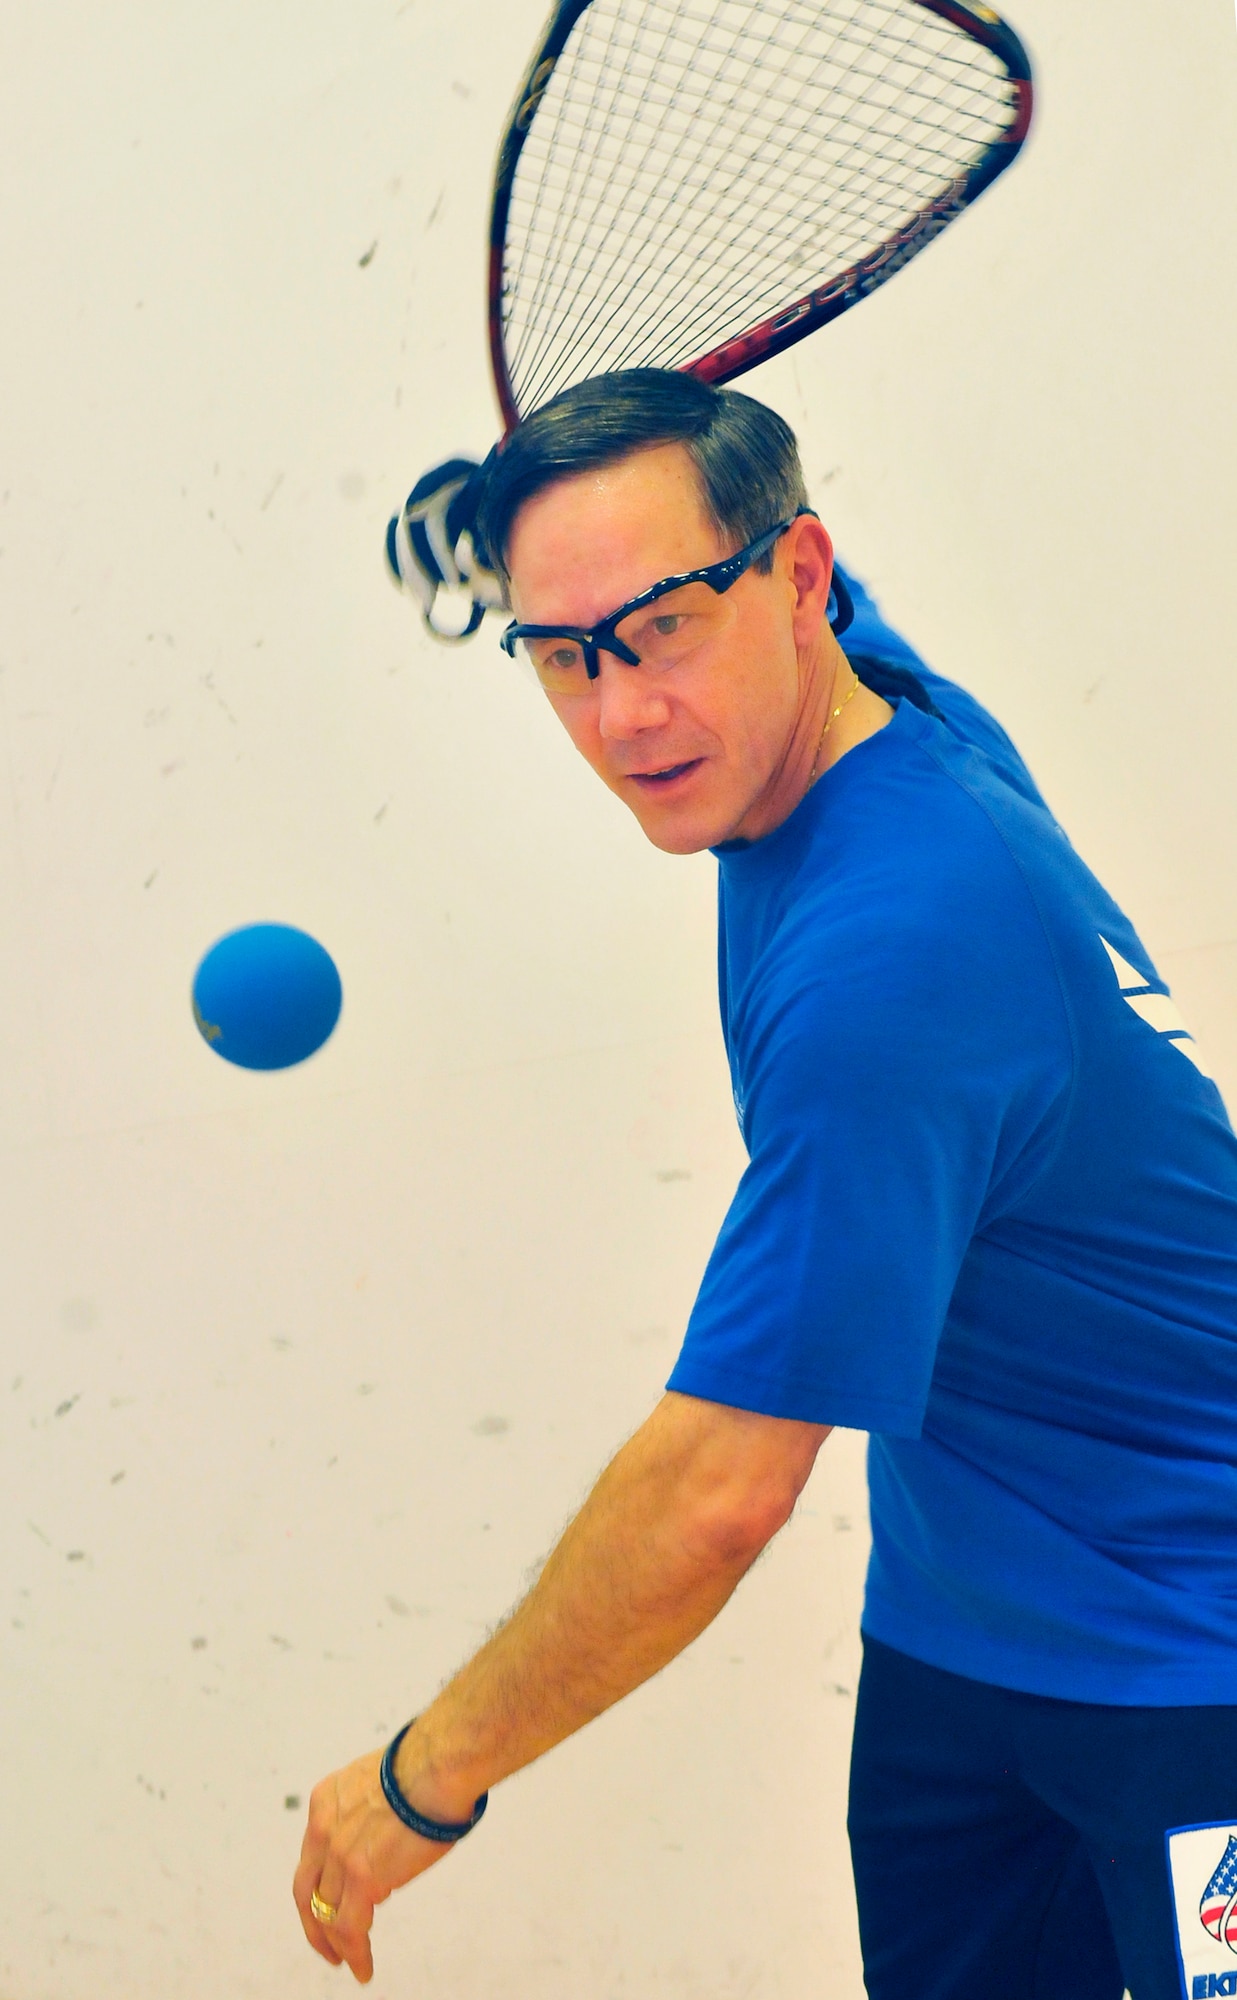 Master Sgt. Frederick Rogers works with the Wounded Warrior Program's Racquetball Rehabilitation Clinic. (U. S. Air Force photo/ Sue Sapp)